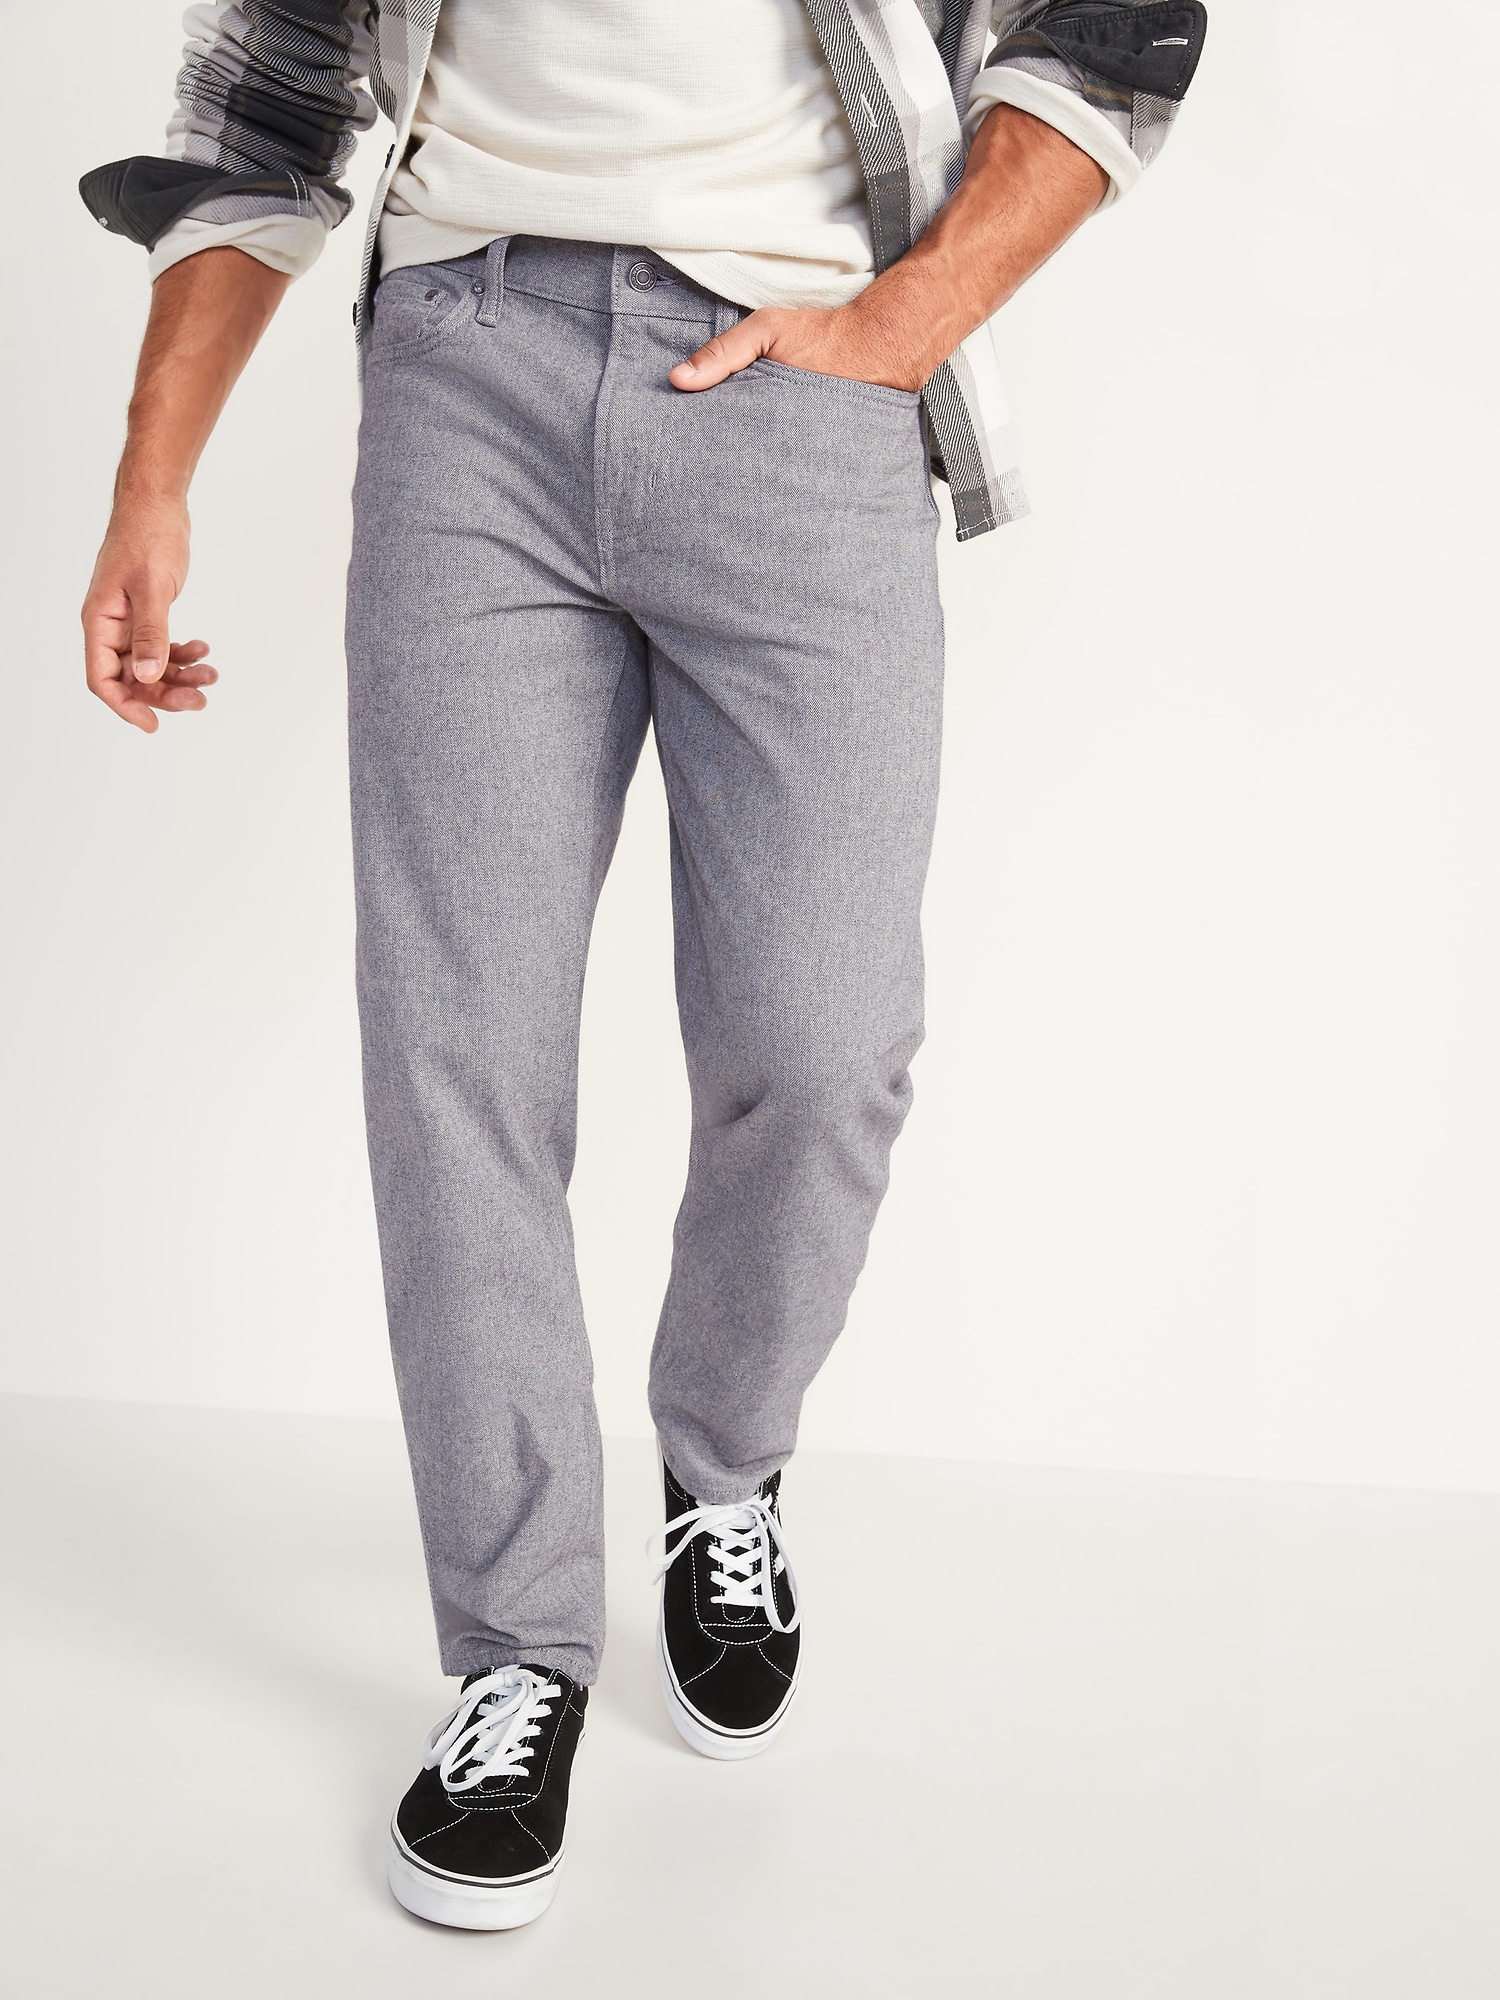 old navy relaxed slim built in flex